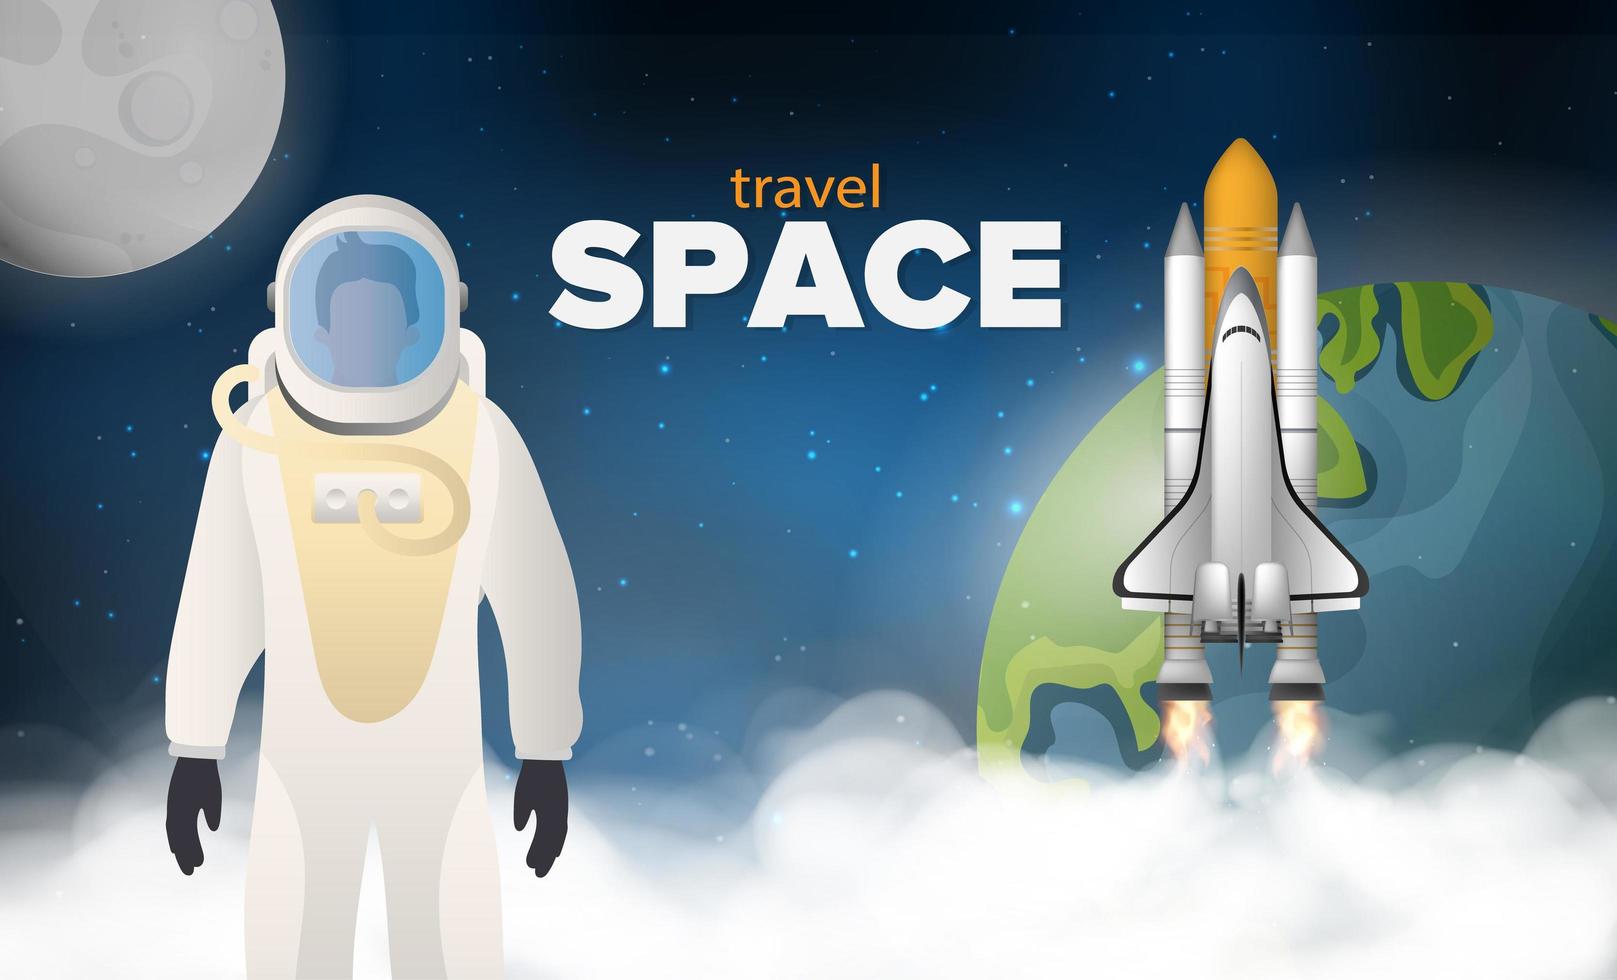 Travel to space. An astronaut in a protective suit. A rocket or shuttle fly in space against the background of space, the planet Earth and the Moon. Realistic style. Vector